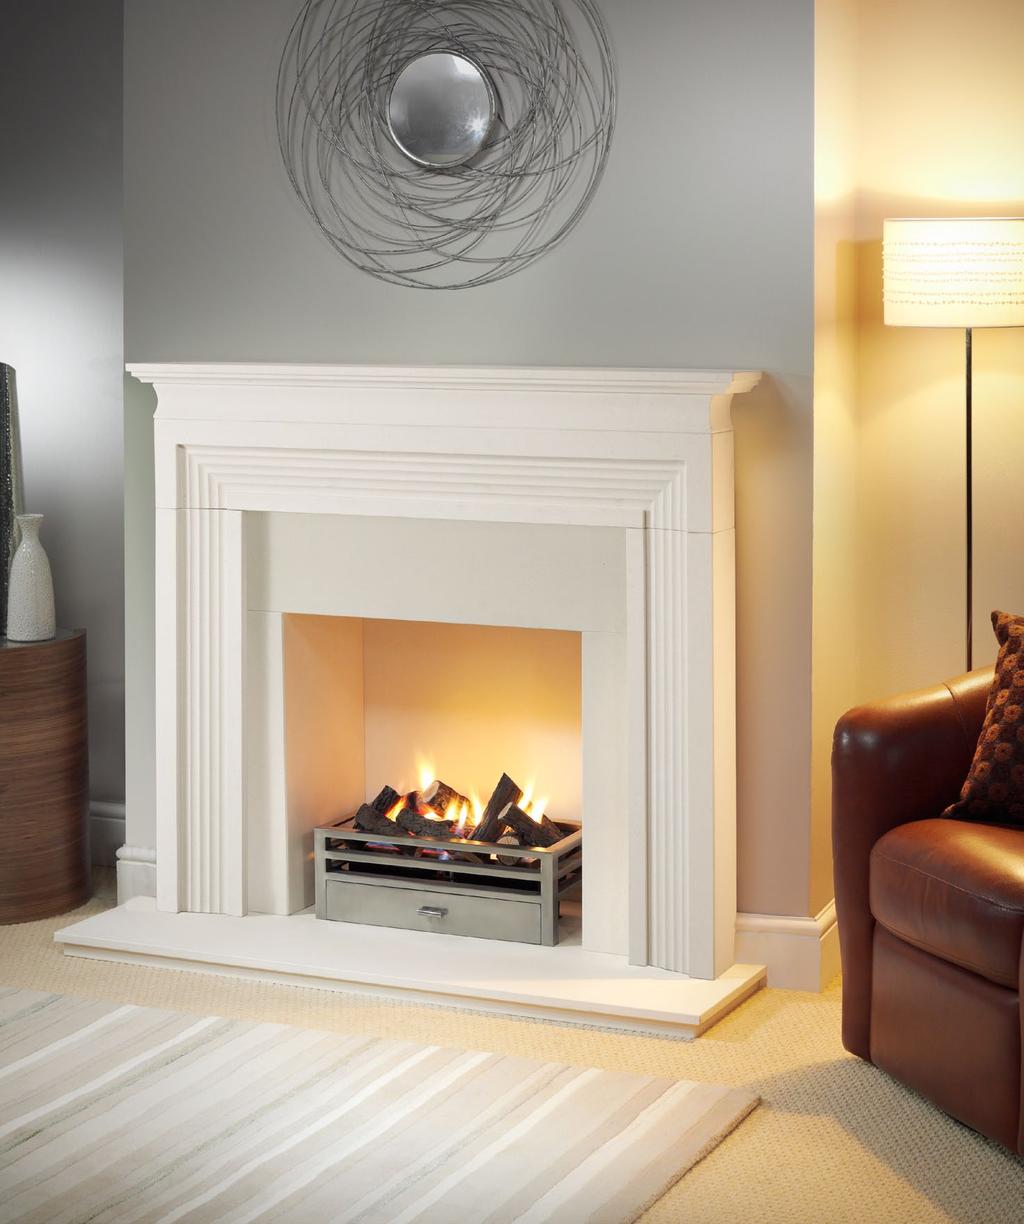 gas fire with ceramic logs, 20 CHAMBER & slips: AGEAN